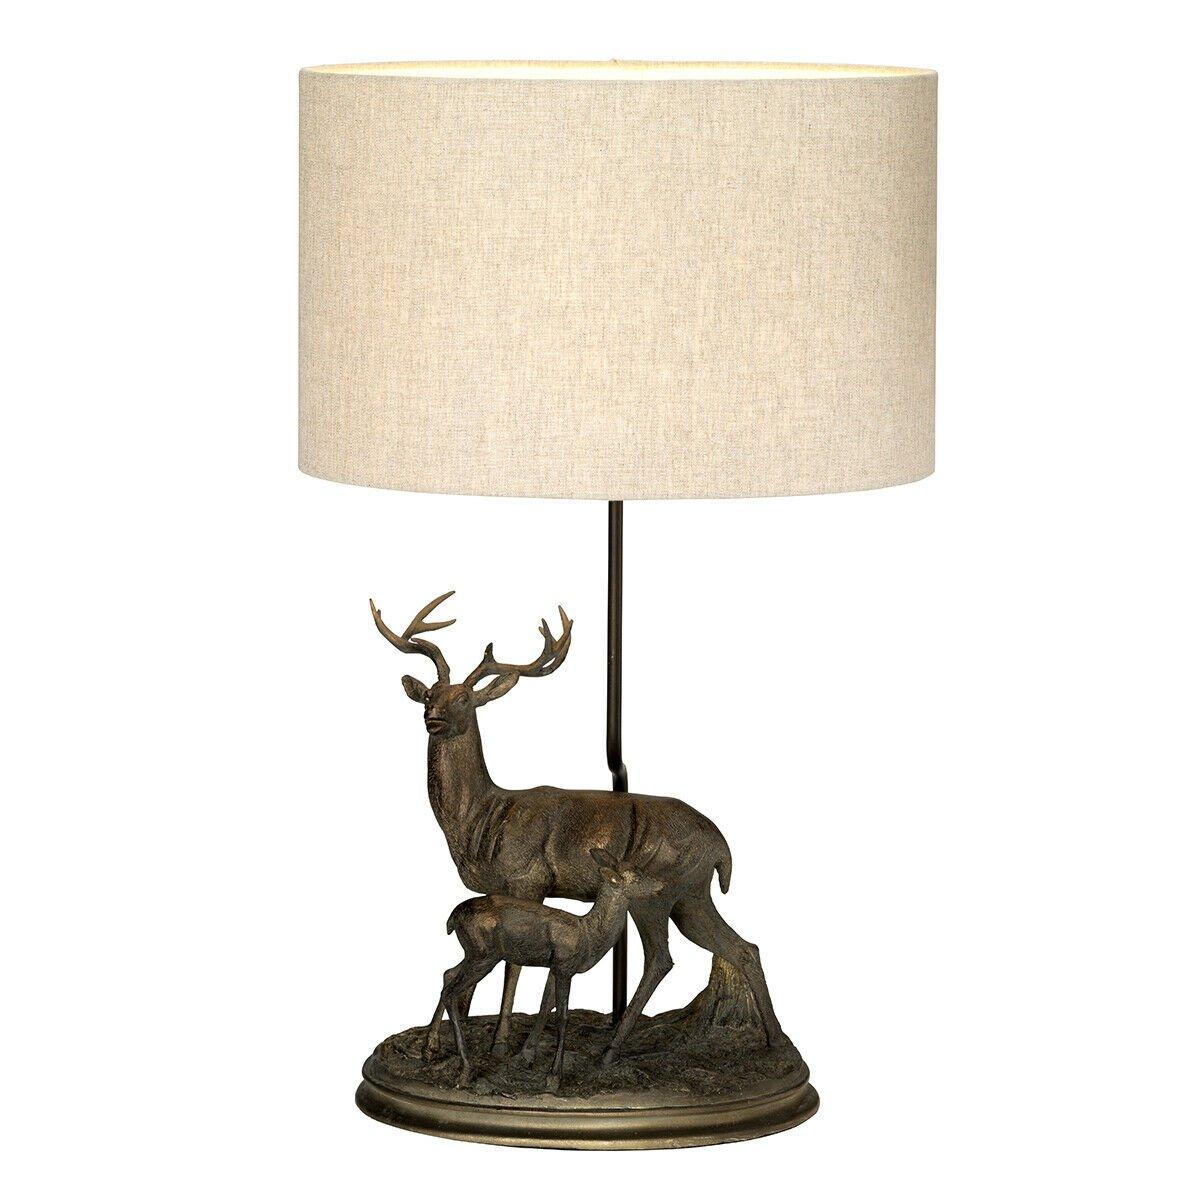 Table Lamp Stag & Fawn Statuette Natural Hessian Shade Bronze Patina LED E27 40w